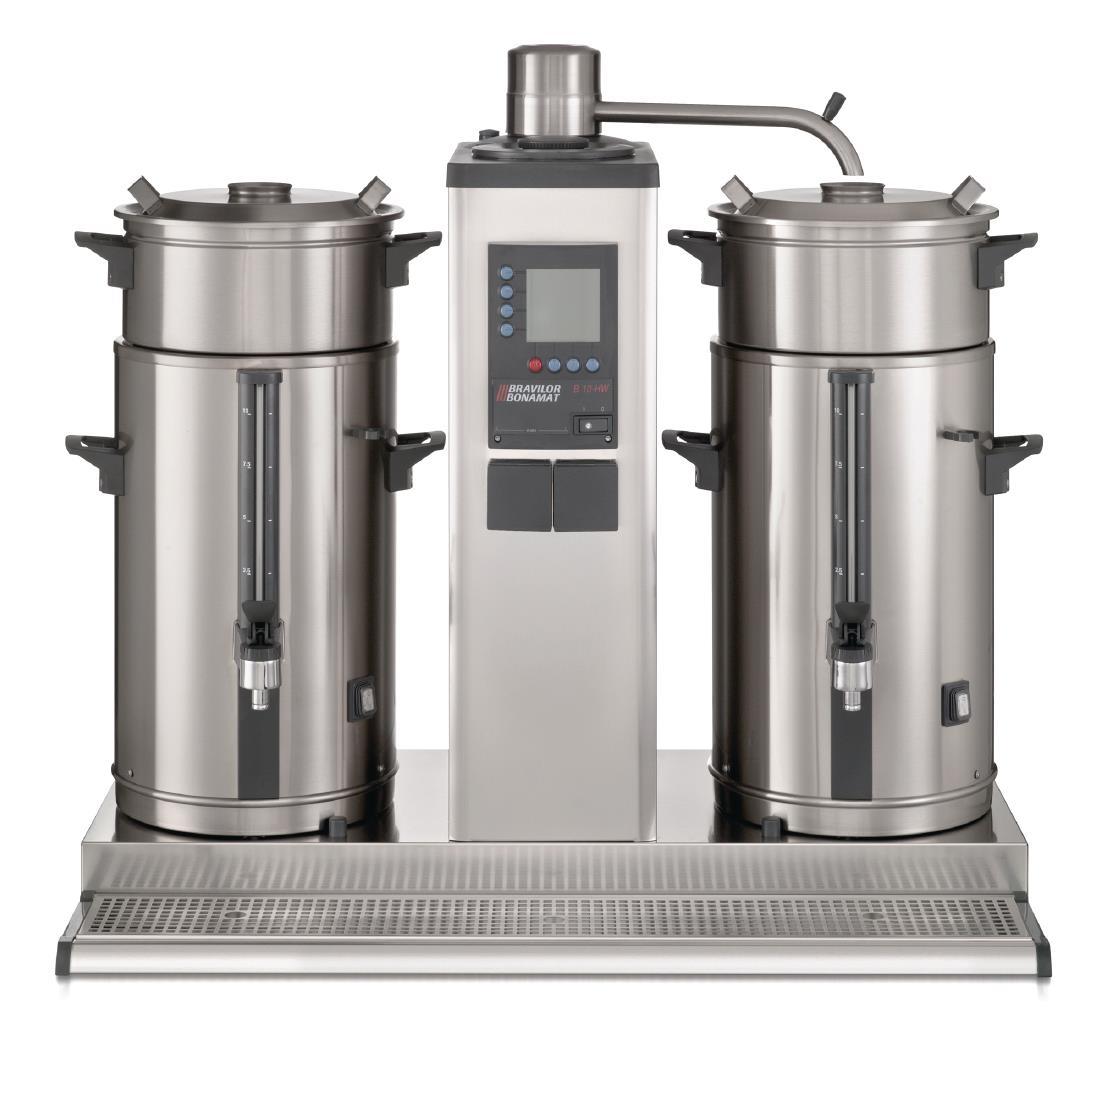 Bravilor B40 Bulk Coffee Brewer with 2x40Ltr Coffee Urns 3 Phase - DC684  - 2